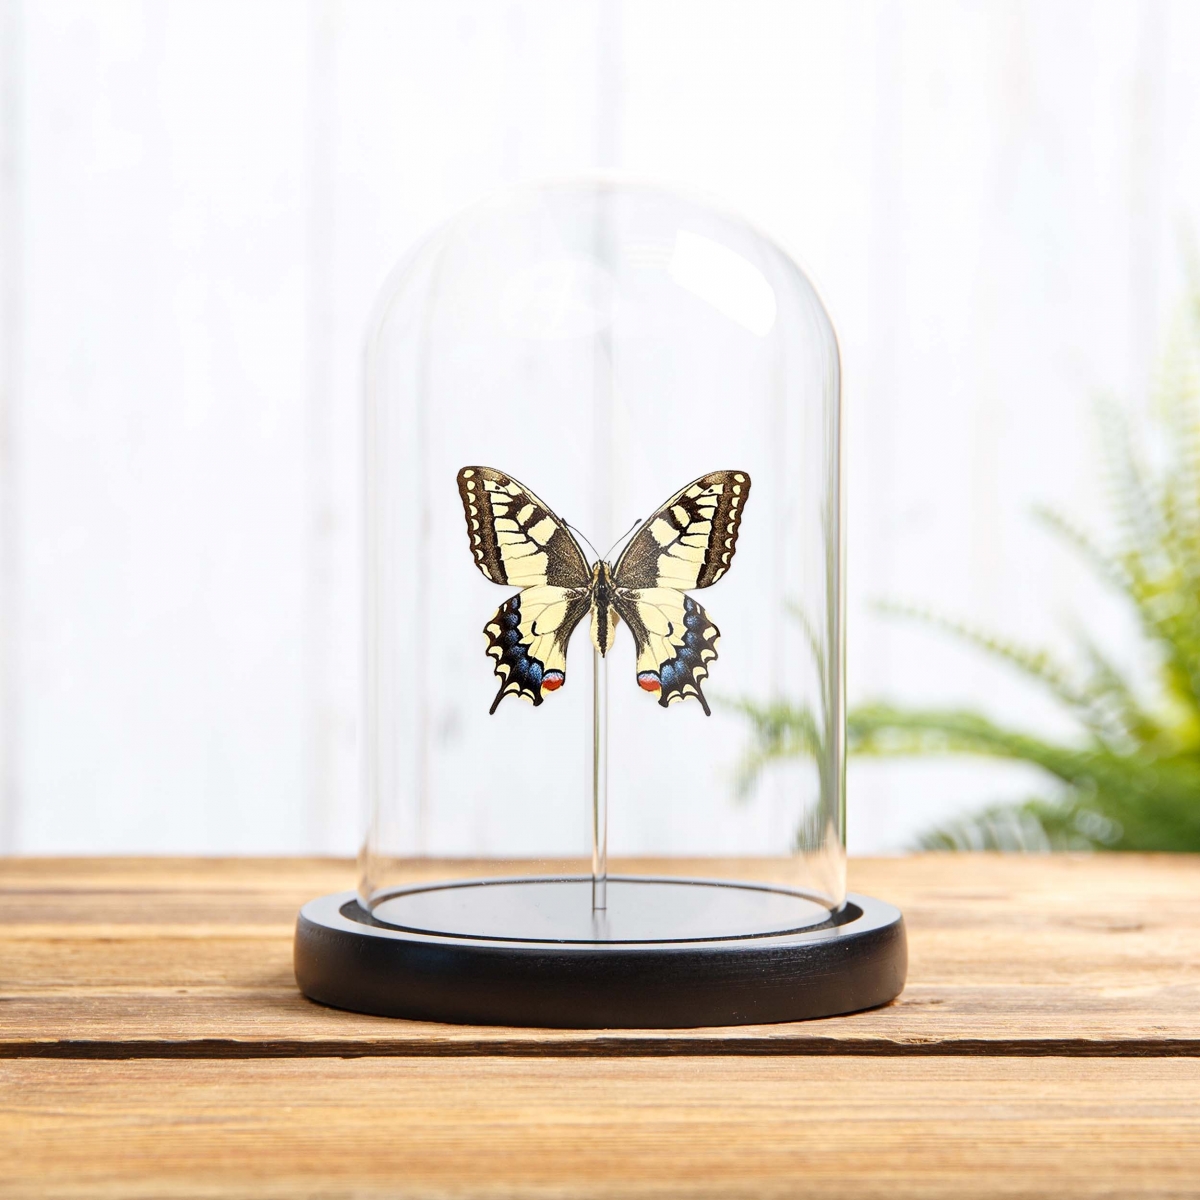 Minibeast Old World Swallowtail in Glass Dome with Wooden Base (Papilio machaon)